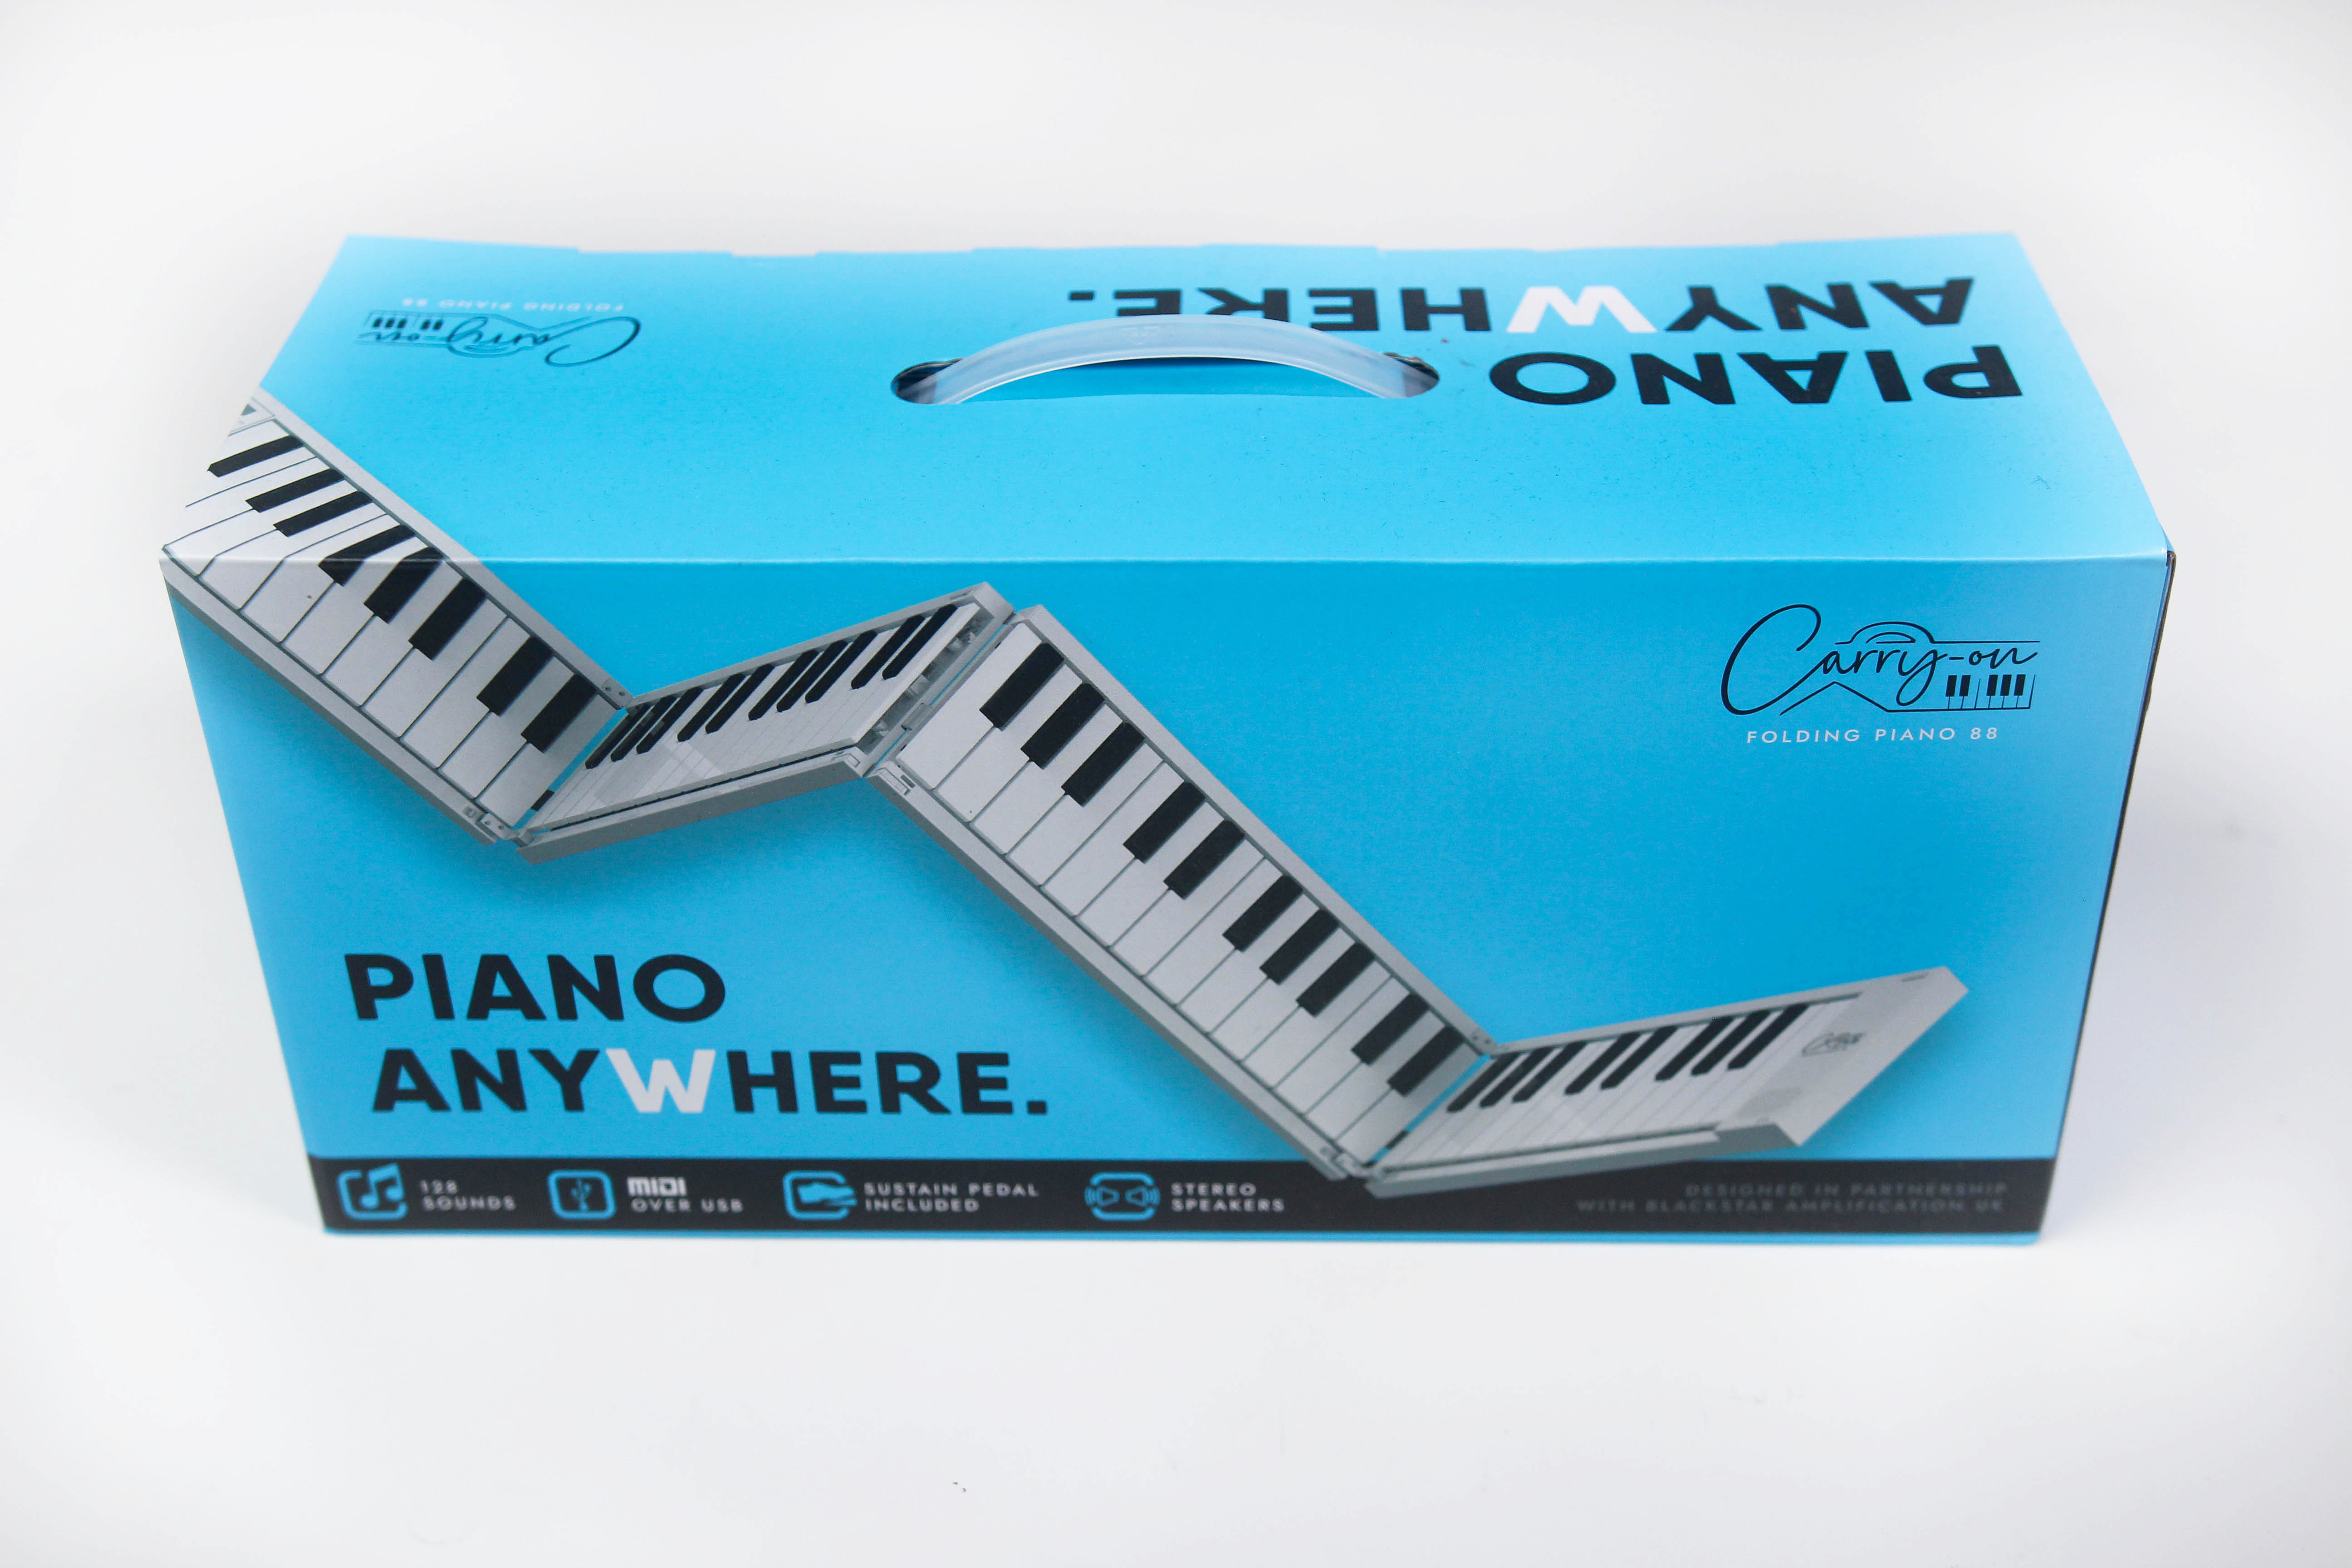 Carry-On Folding Piano 88